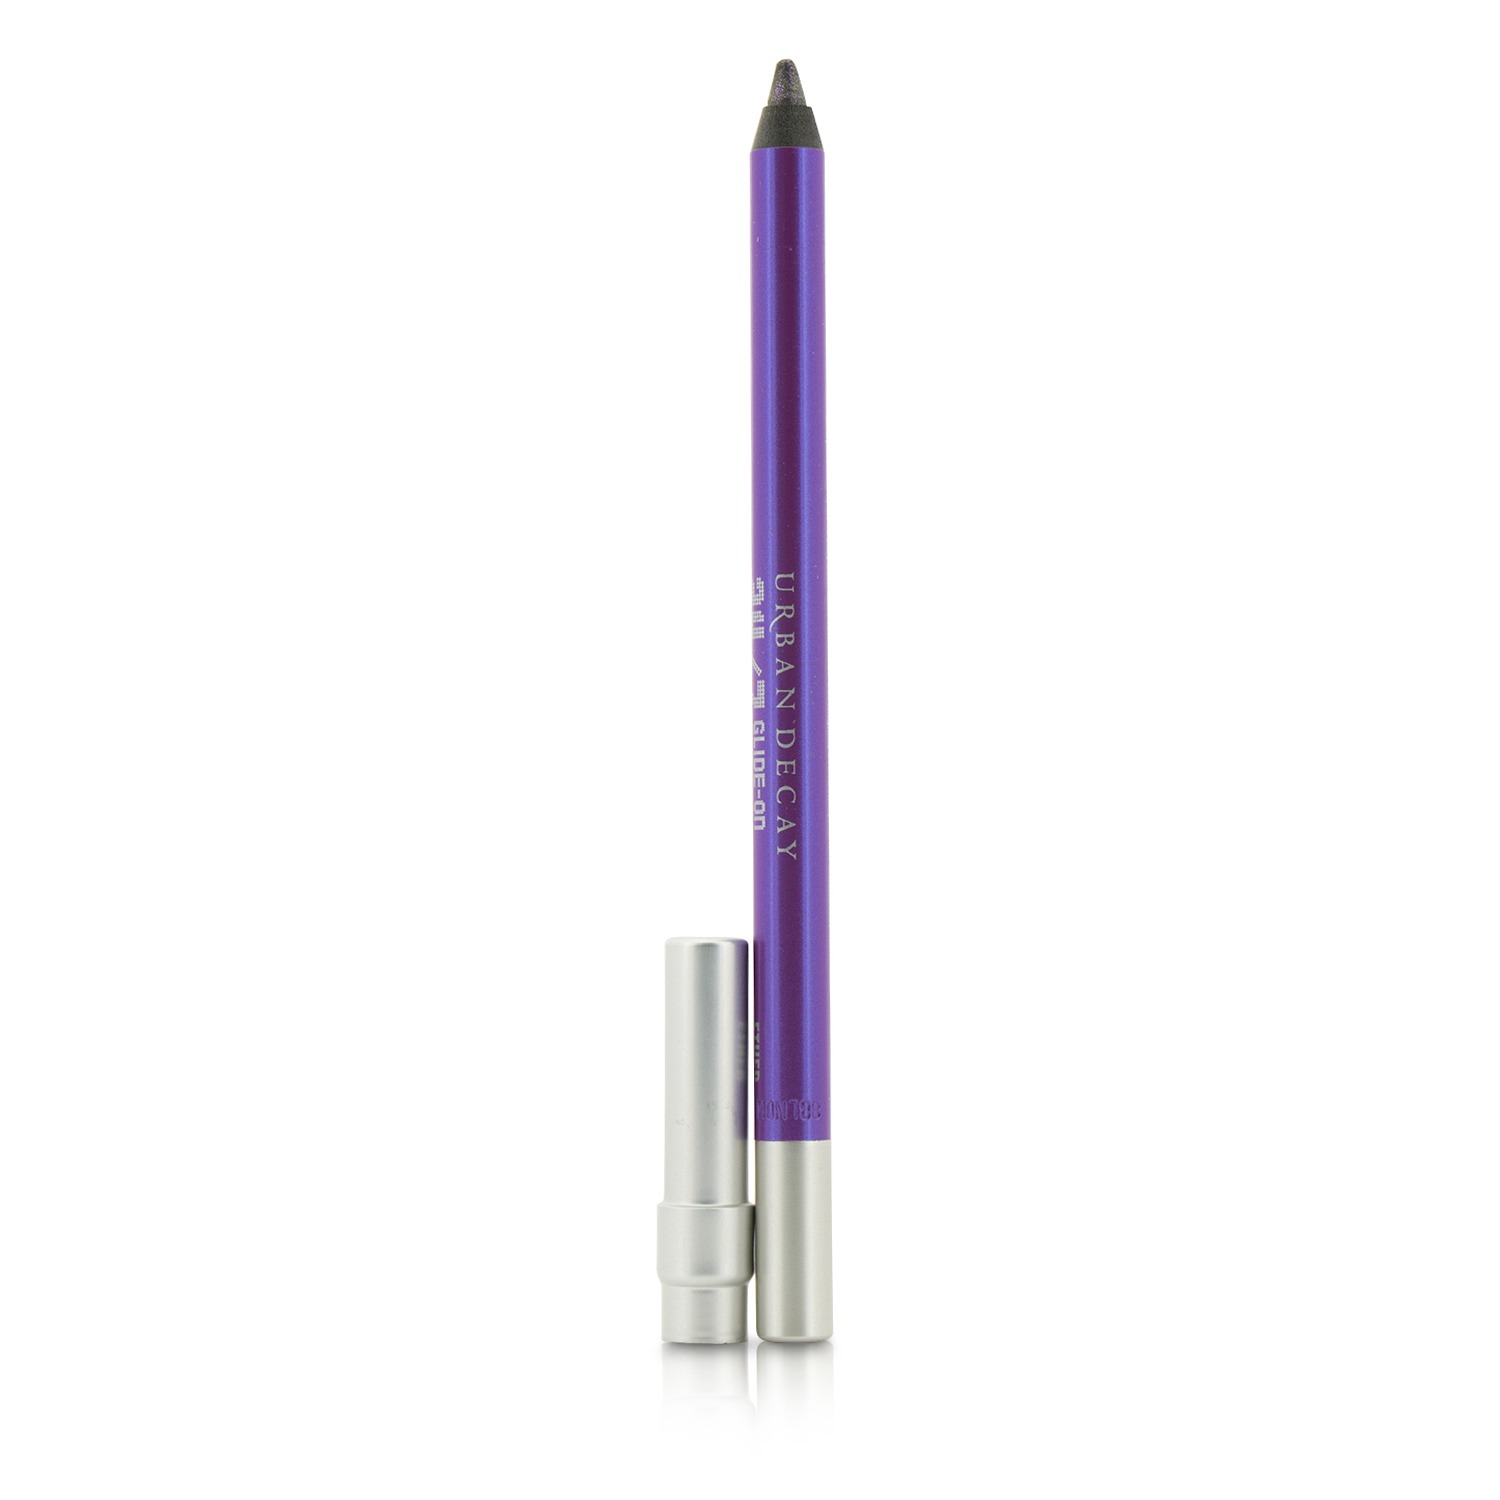 24/7 Glide On Eye Pencil - Ether (Unboxed) Urban Decay Image